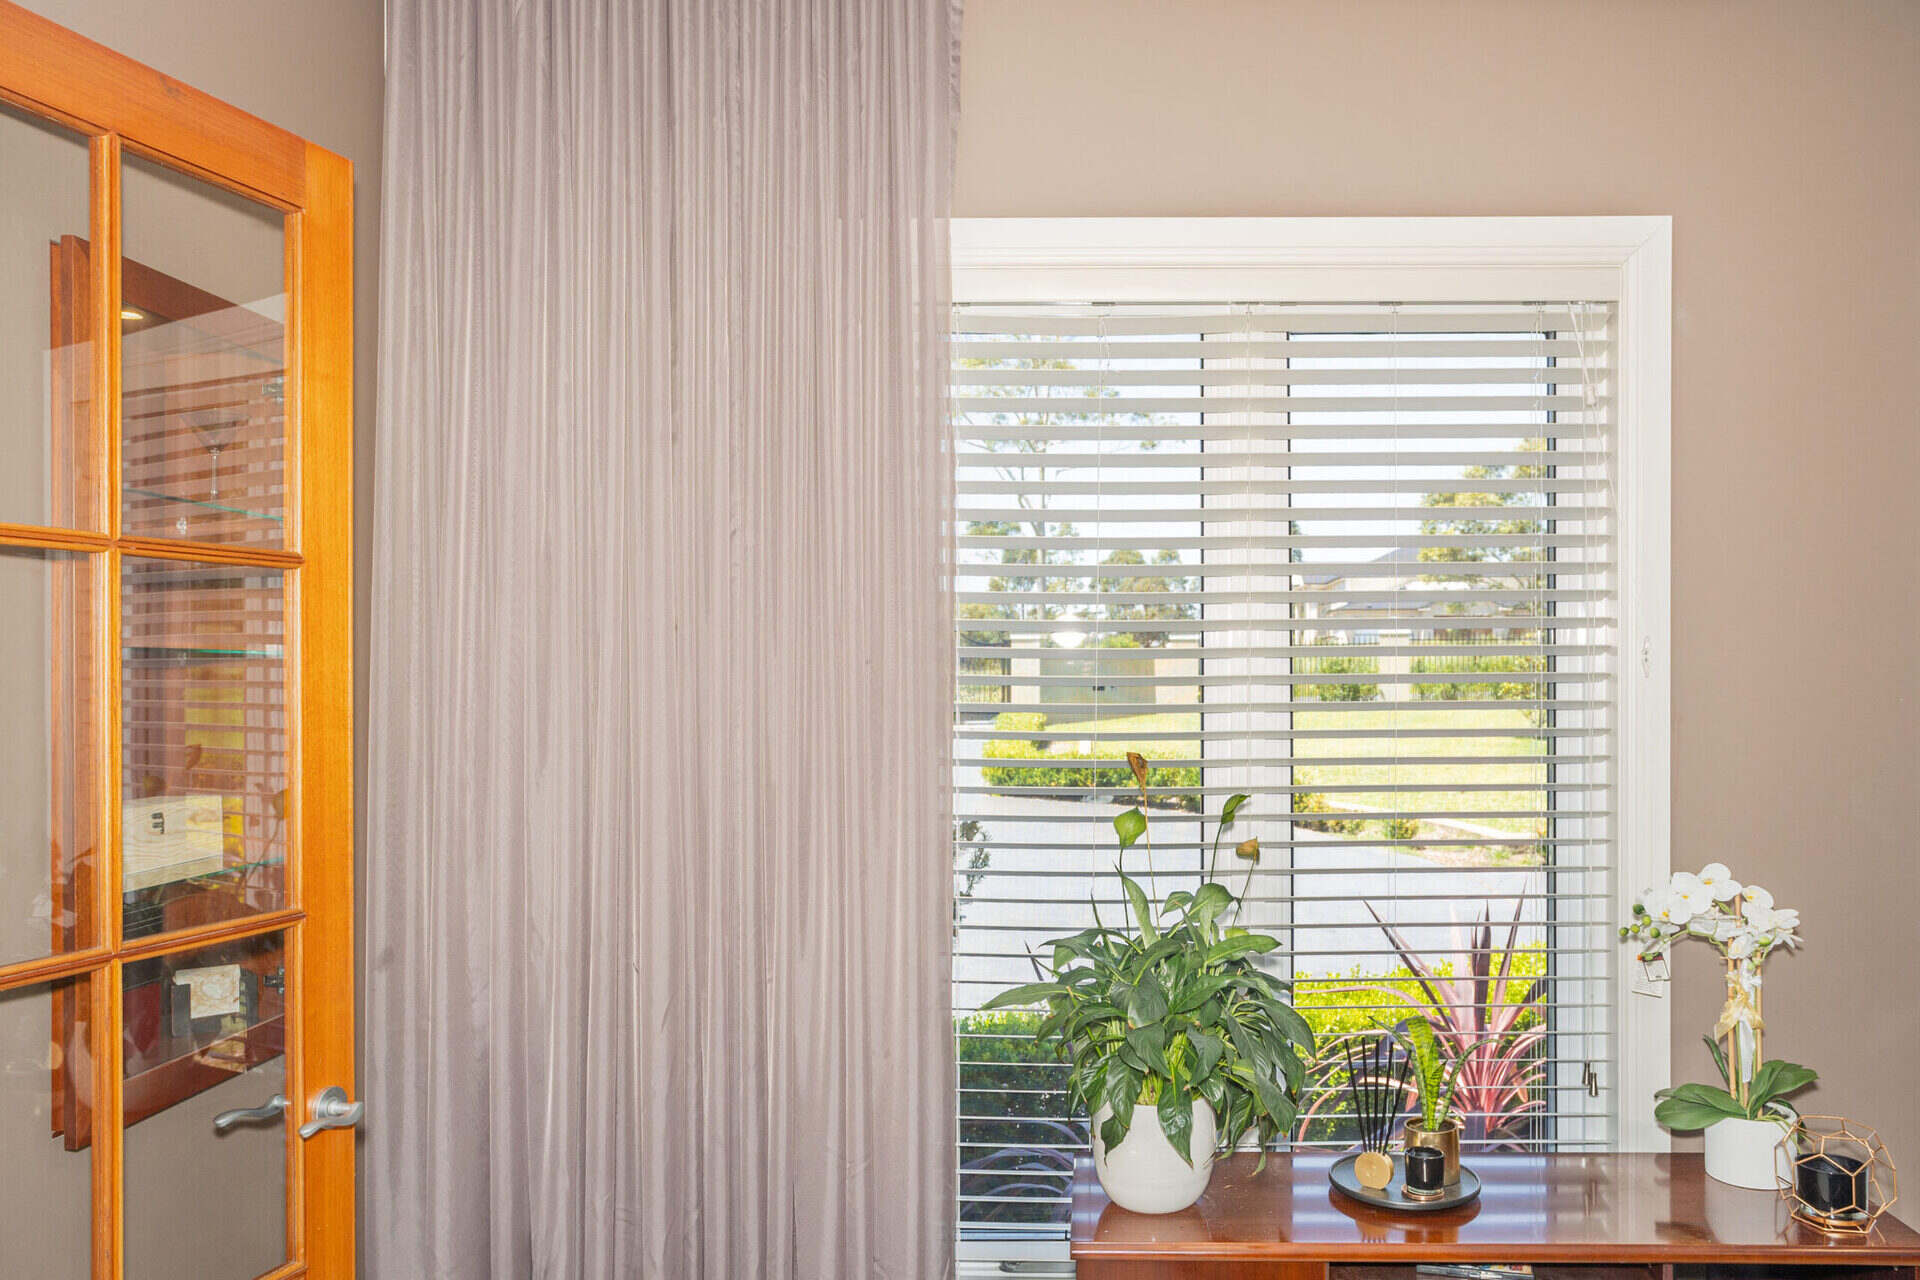 How To Fix Blinds That Won’t Close All The Way